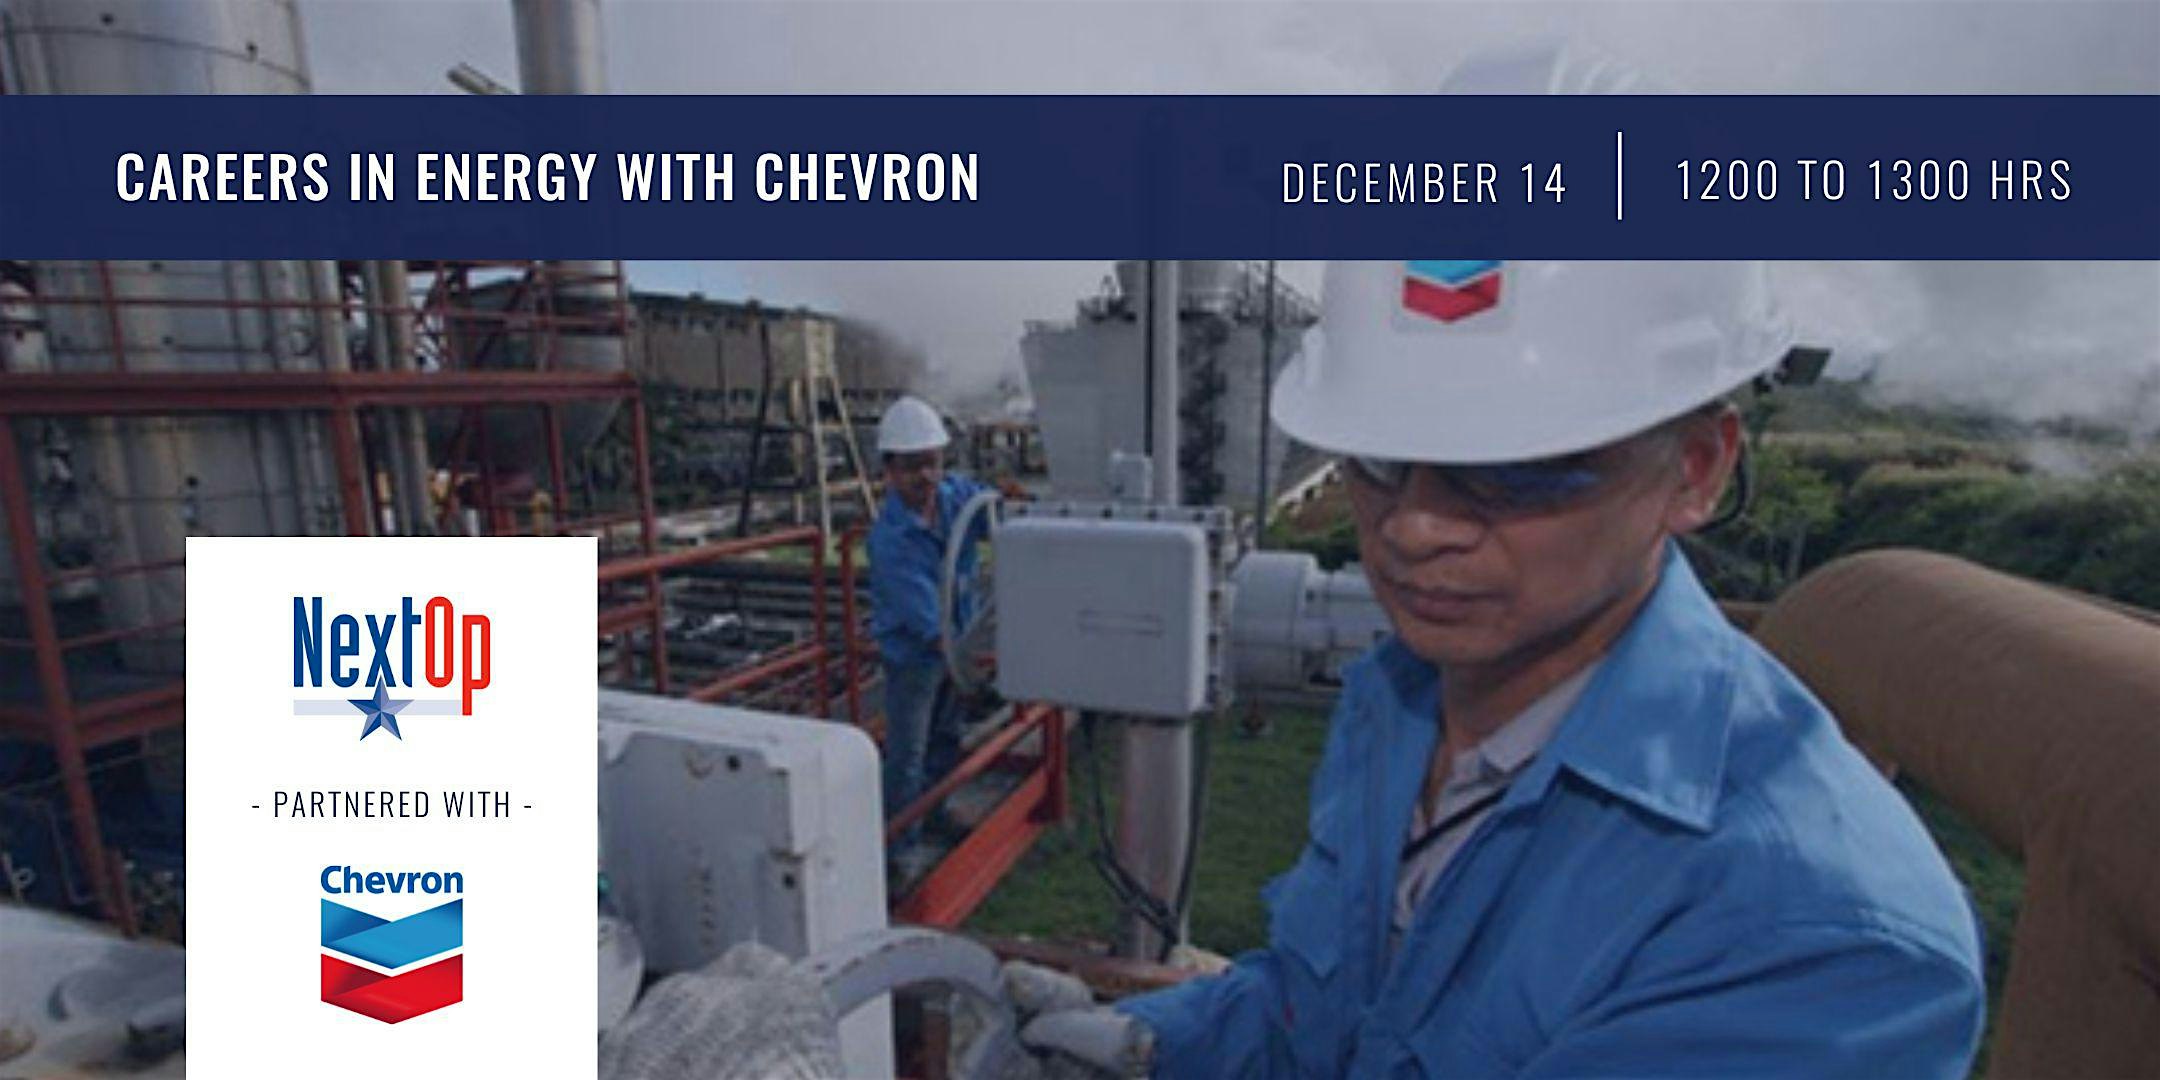 Careers In Energy with Chevron